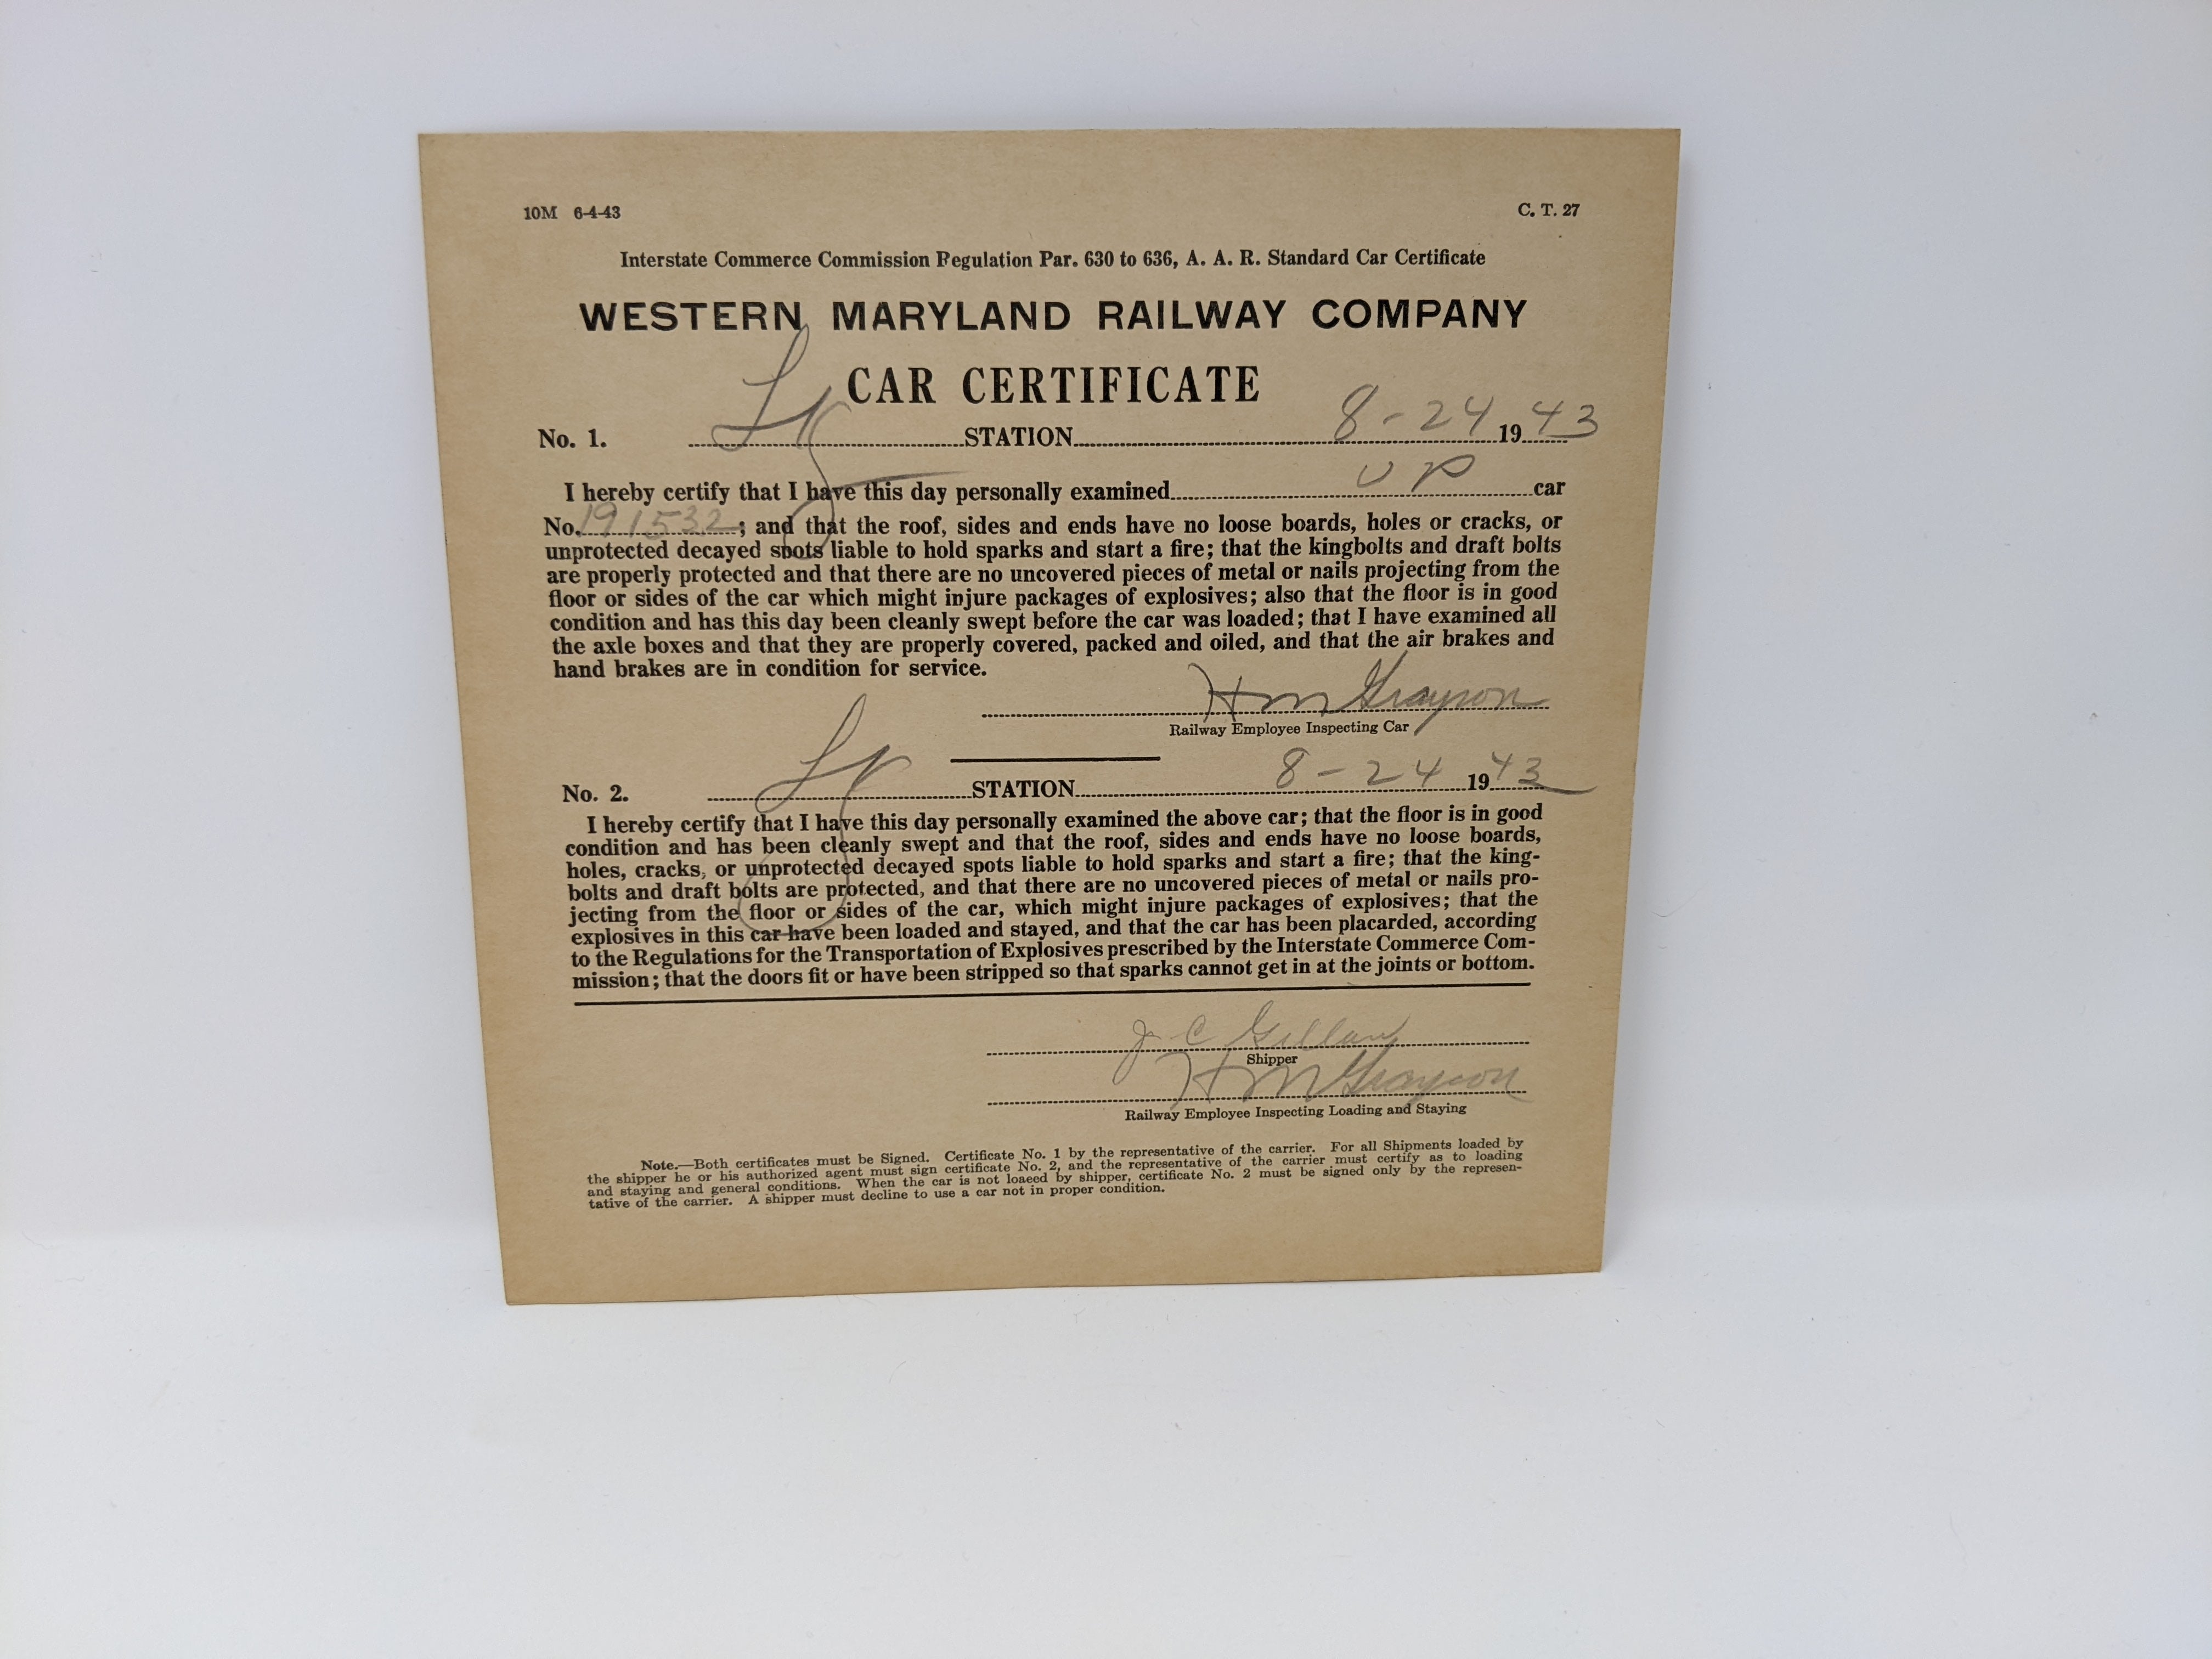 USED , Western Maryland Railway Company Car Certificate, Union Pacific UP #191532, 1943